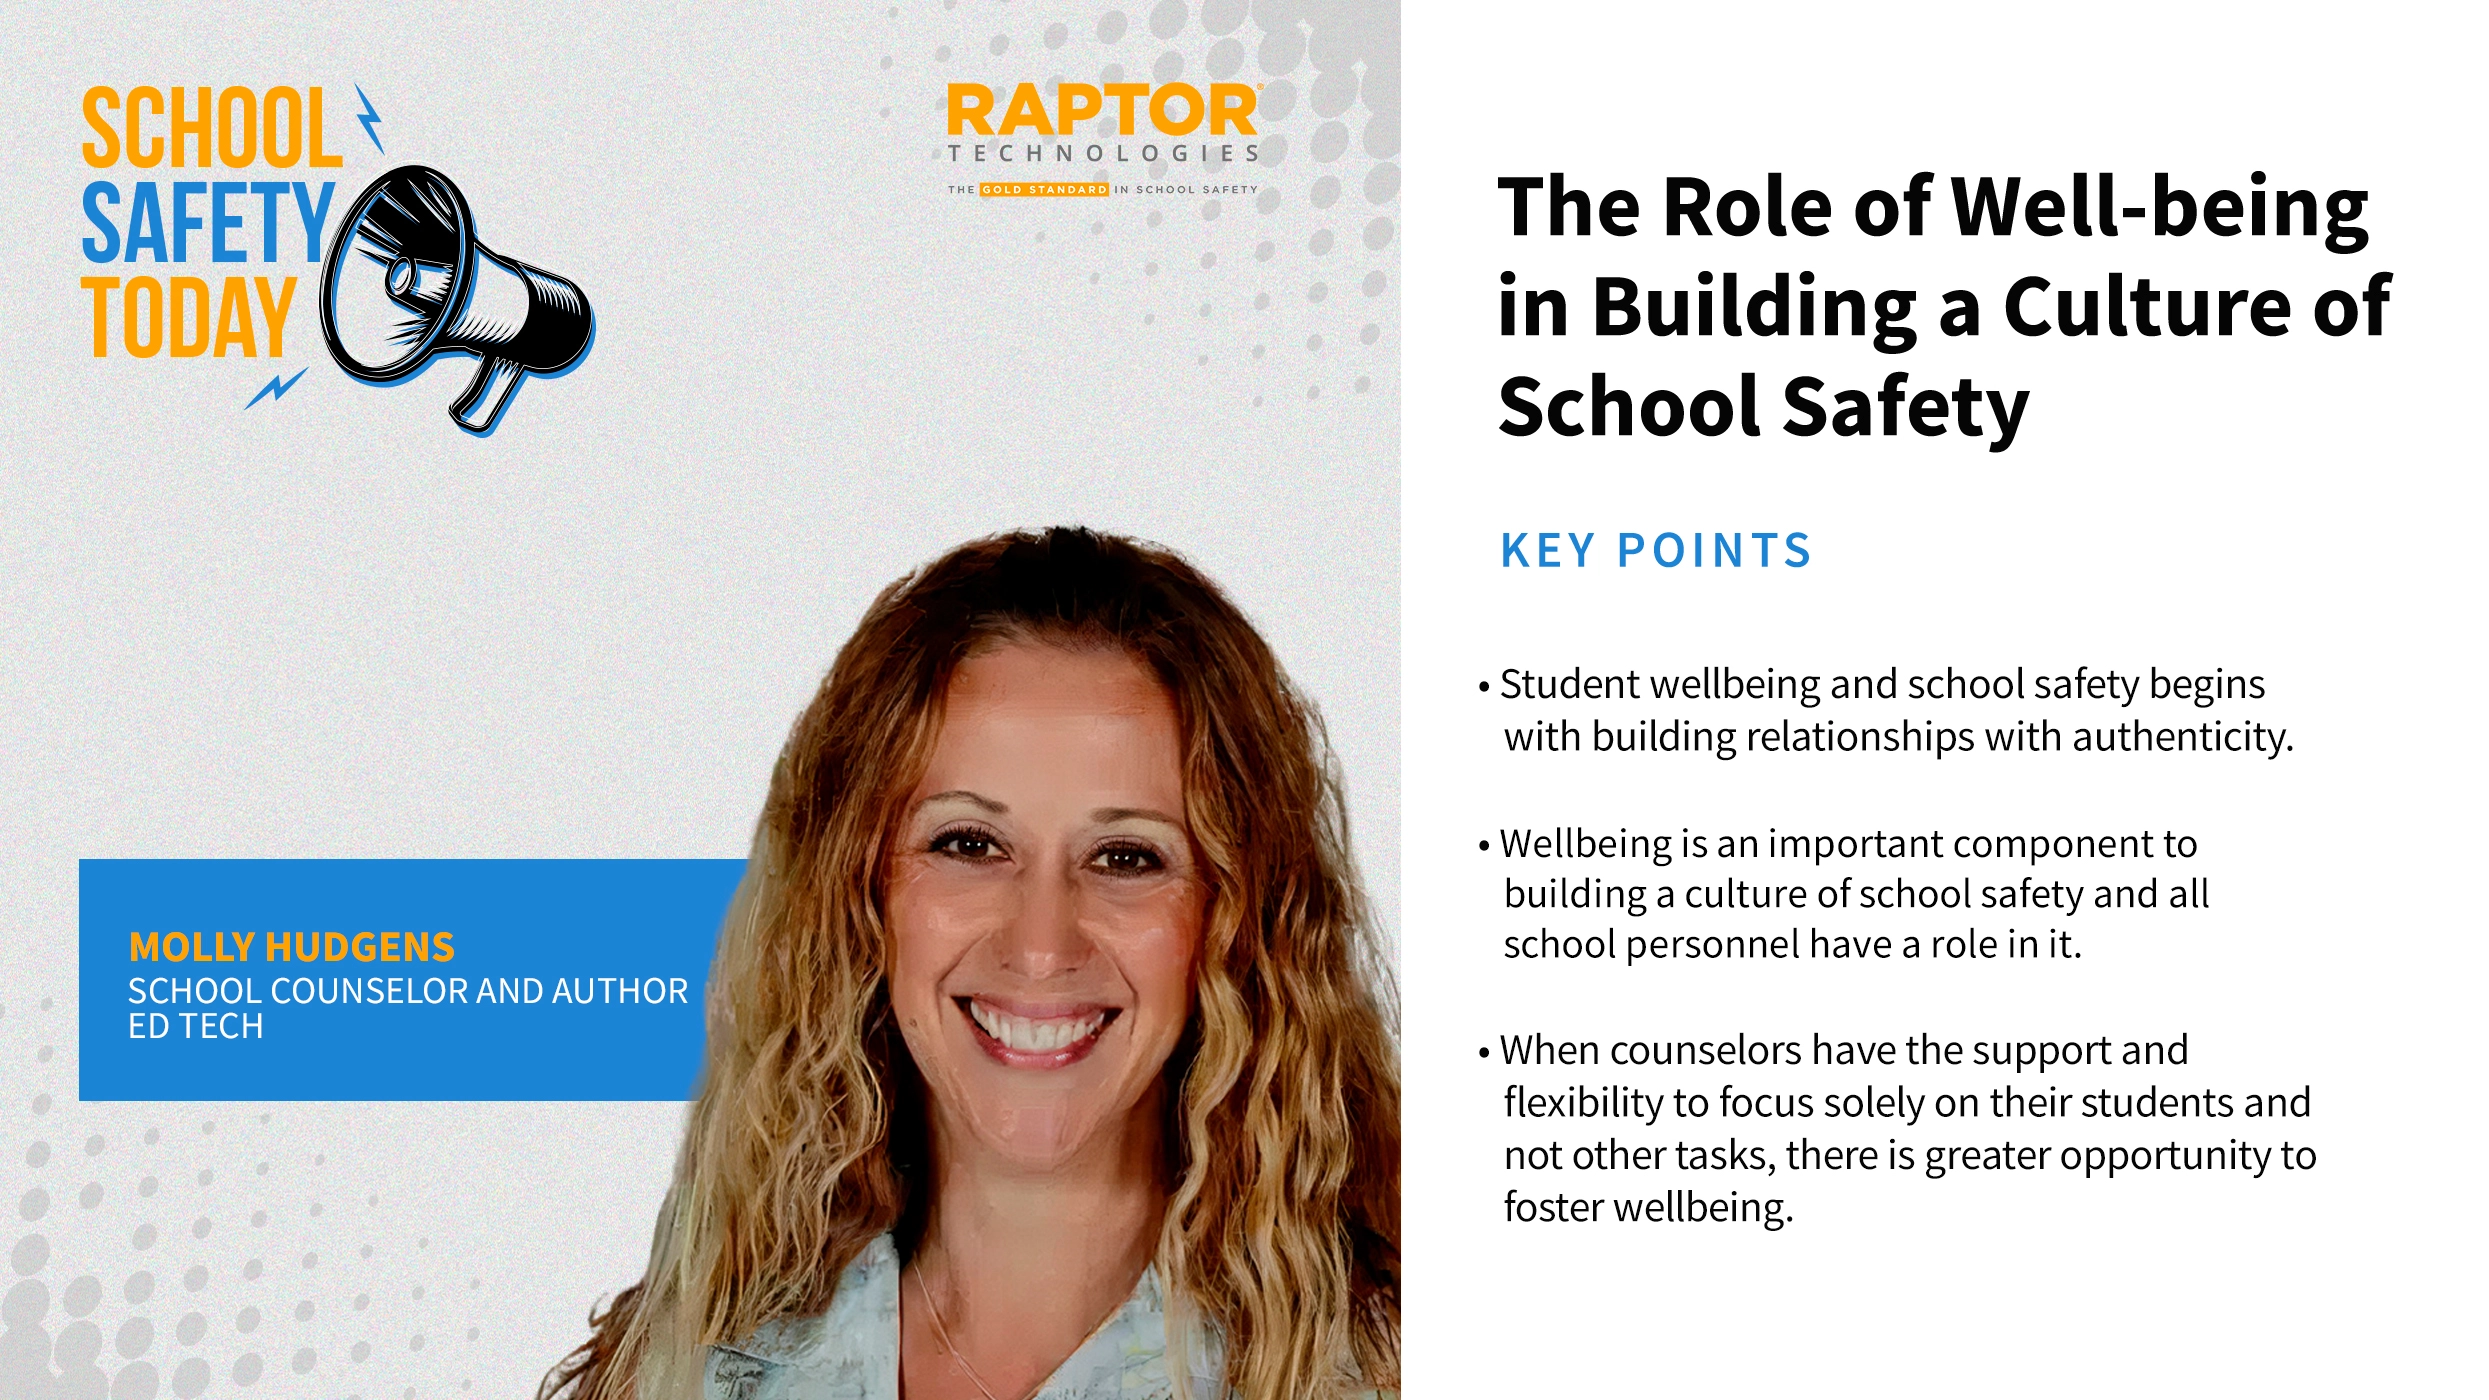 School Safety Today: The Role of  Wellbeing in Building a Culture of School Safety